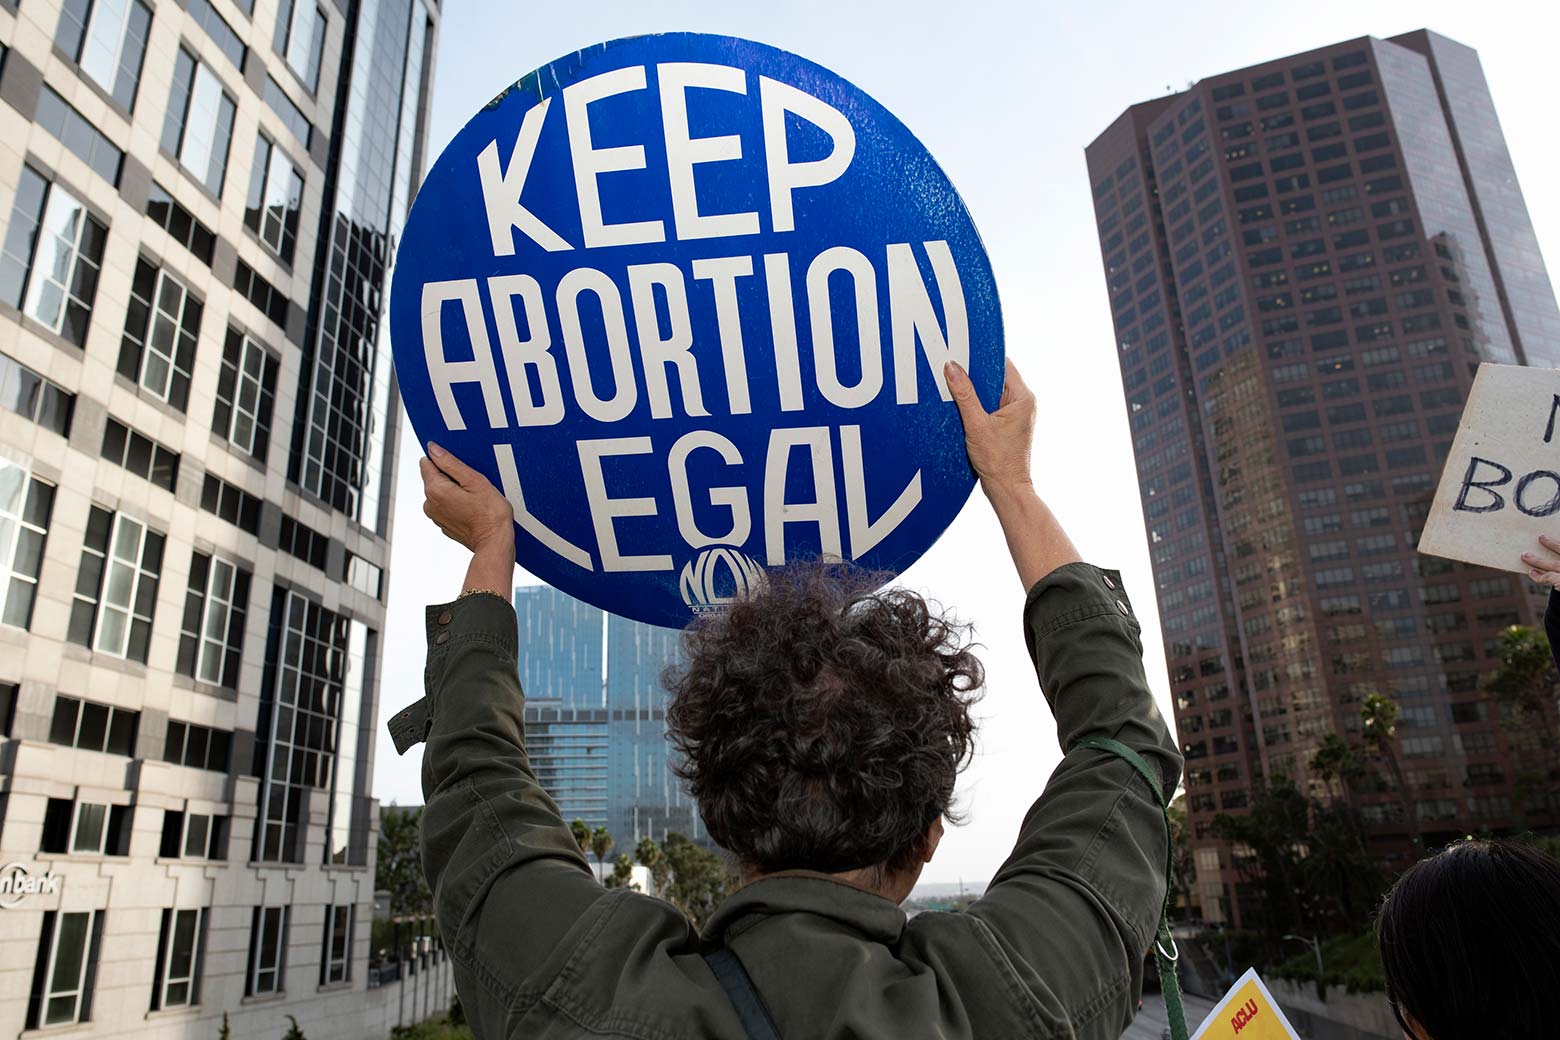 A protester holds up a sign reading "KEEP ABORTION LEGAL."